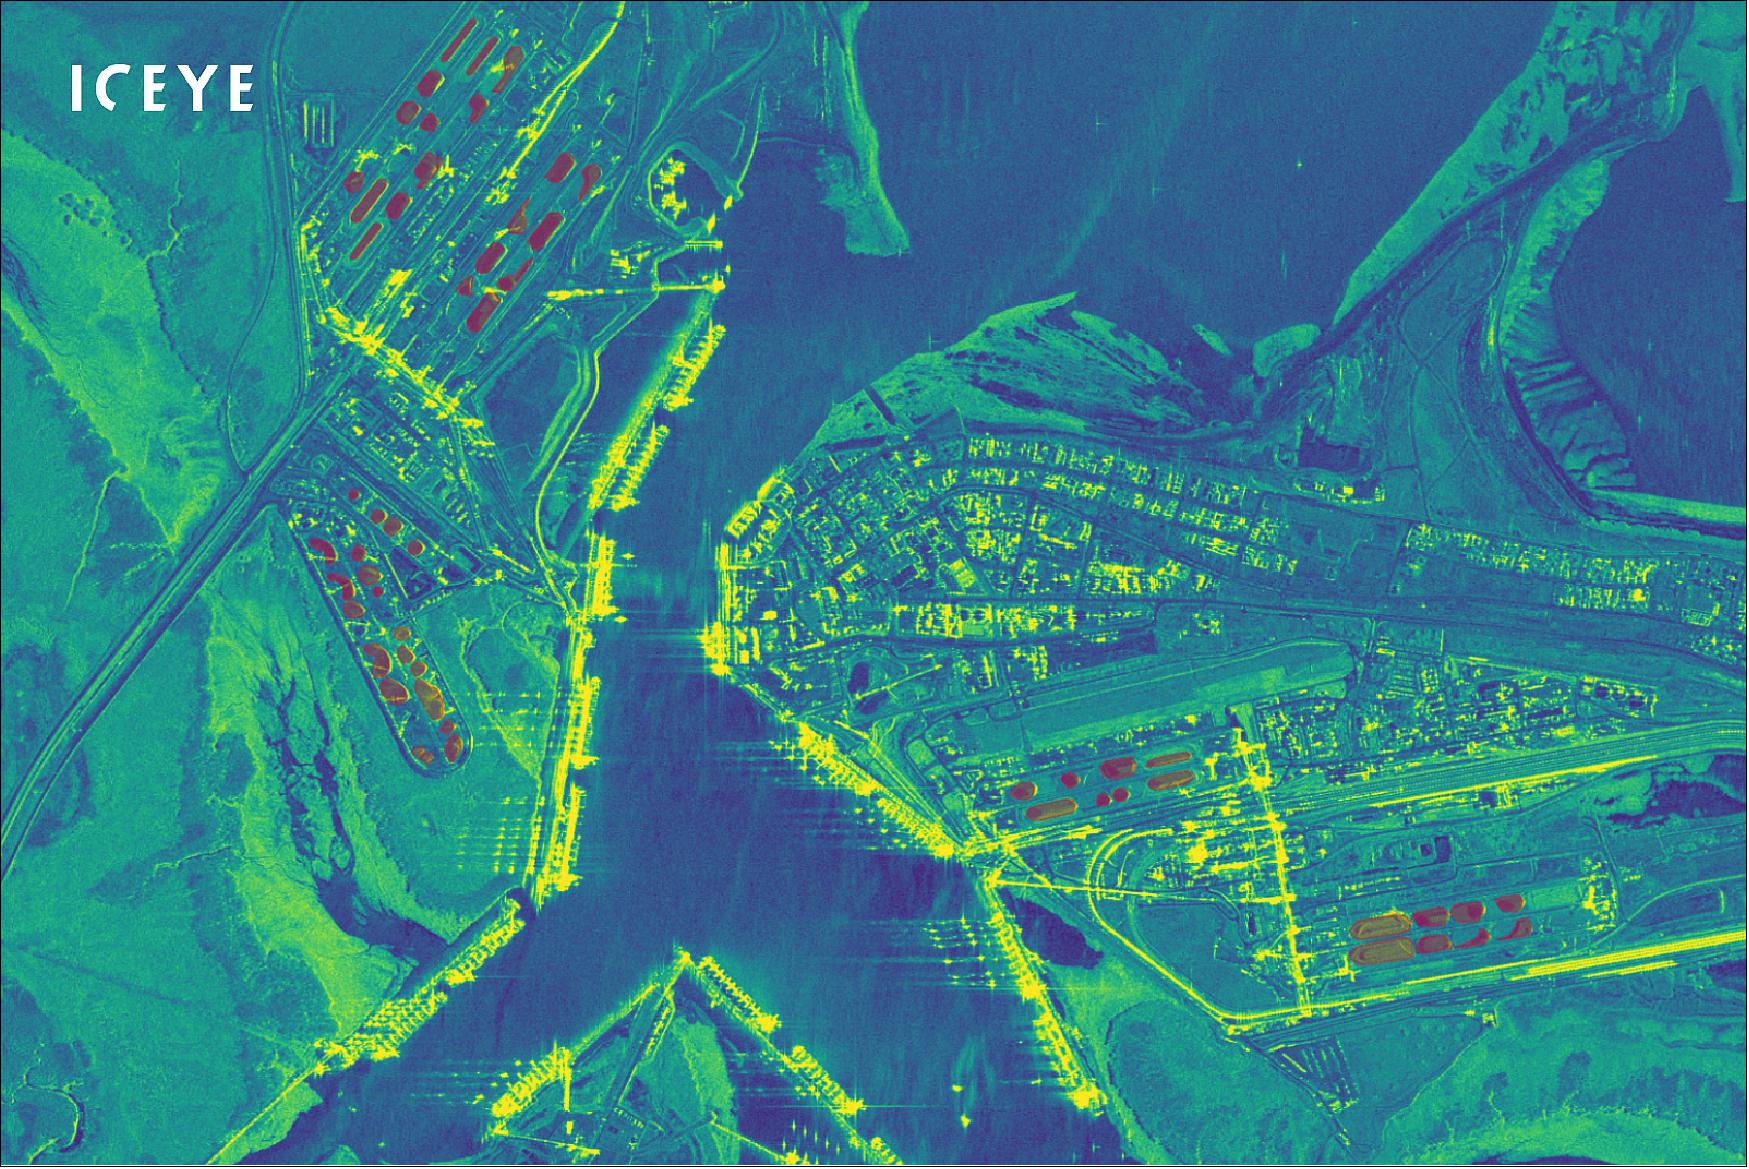 Figure 46: Iron ore stockpiles seen and measured from ICEYE high resolution SAR imaging, at the port of Port Hedland, Australia, ready for further analysis (image credit: ICEYE)